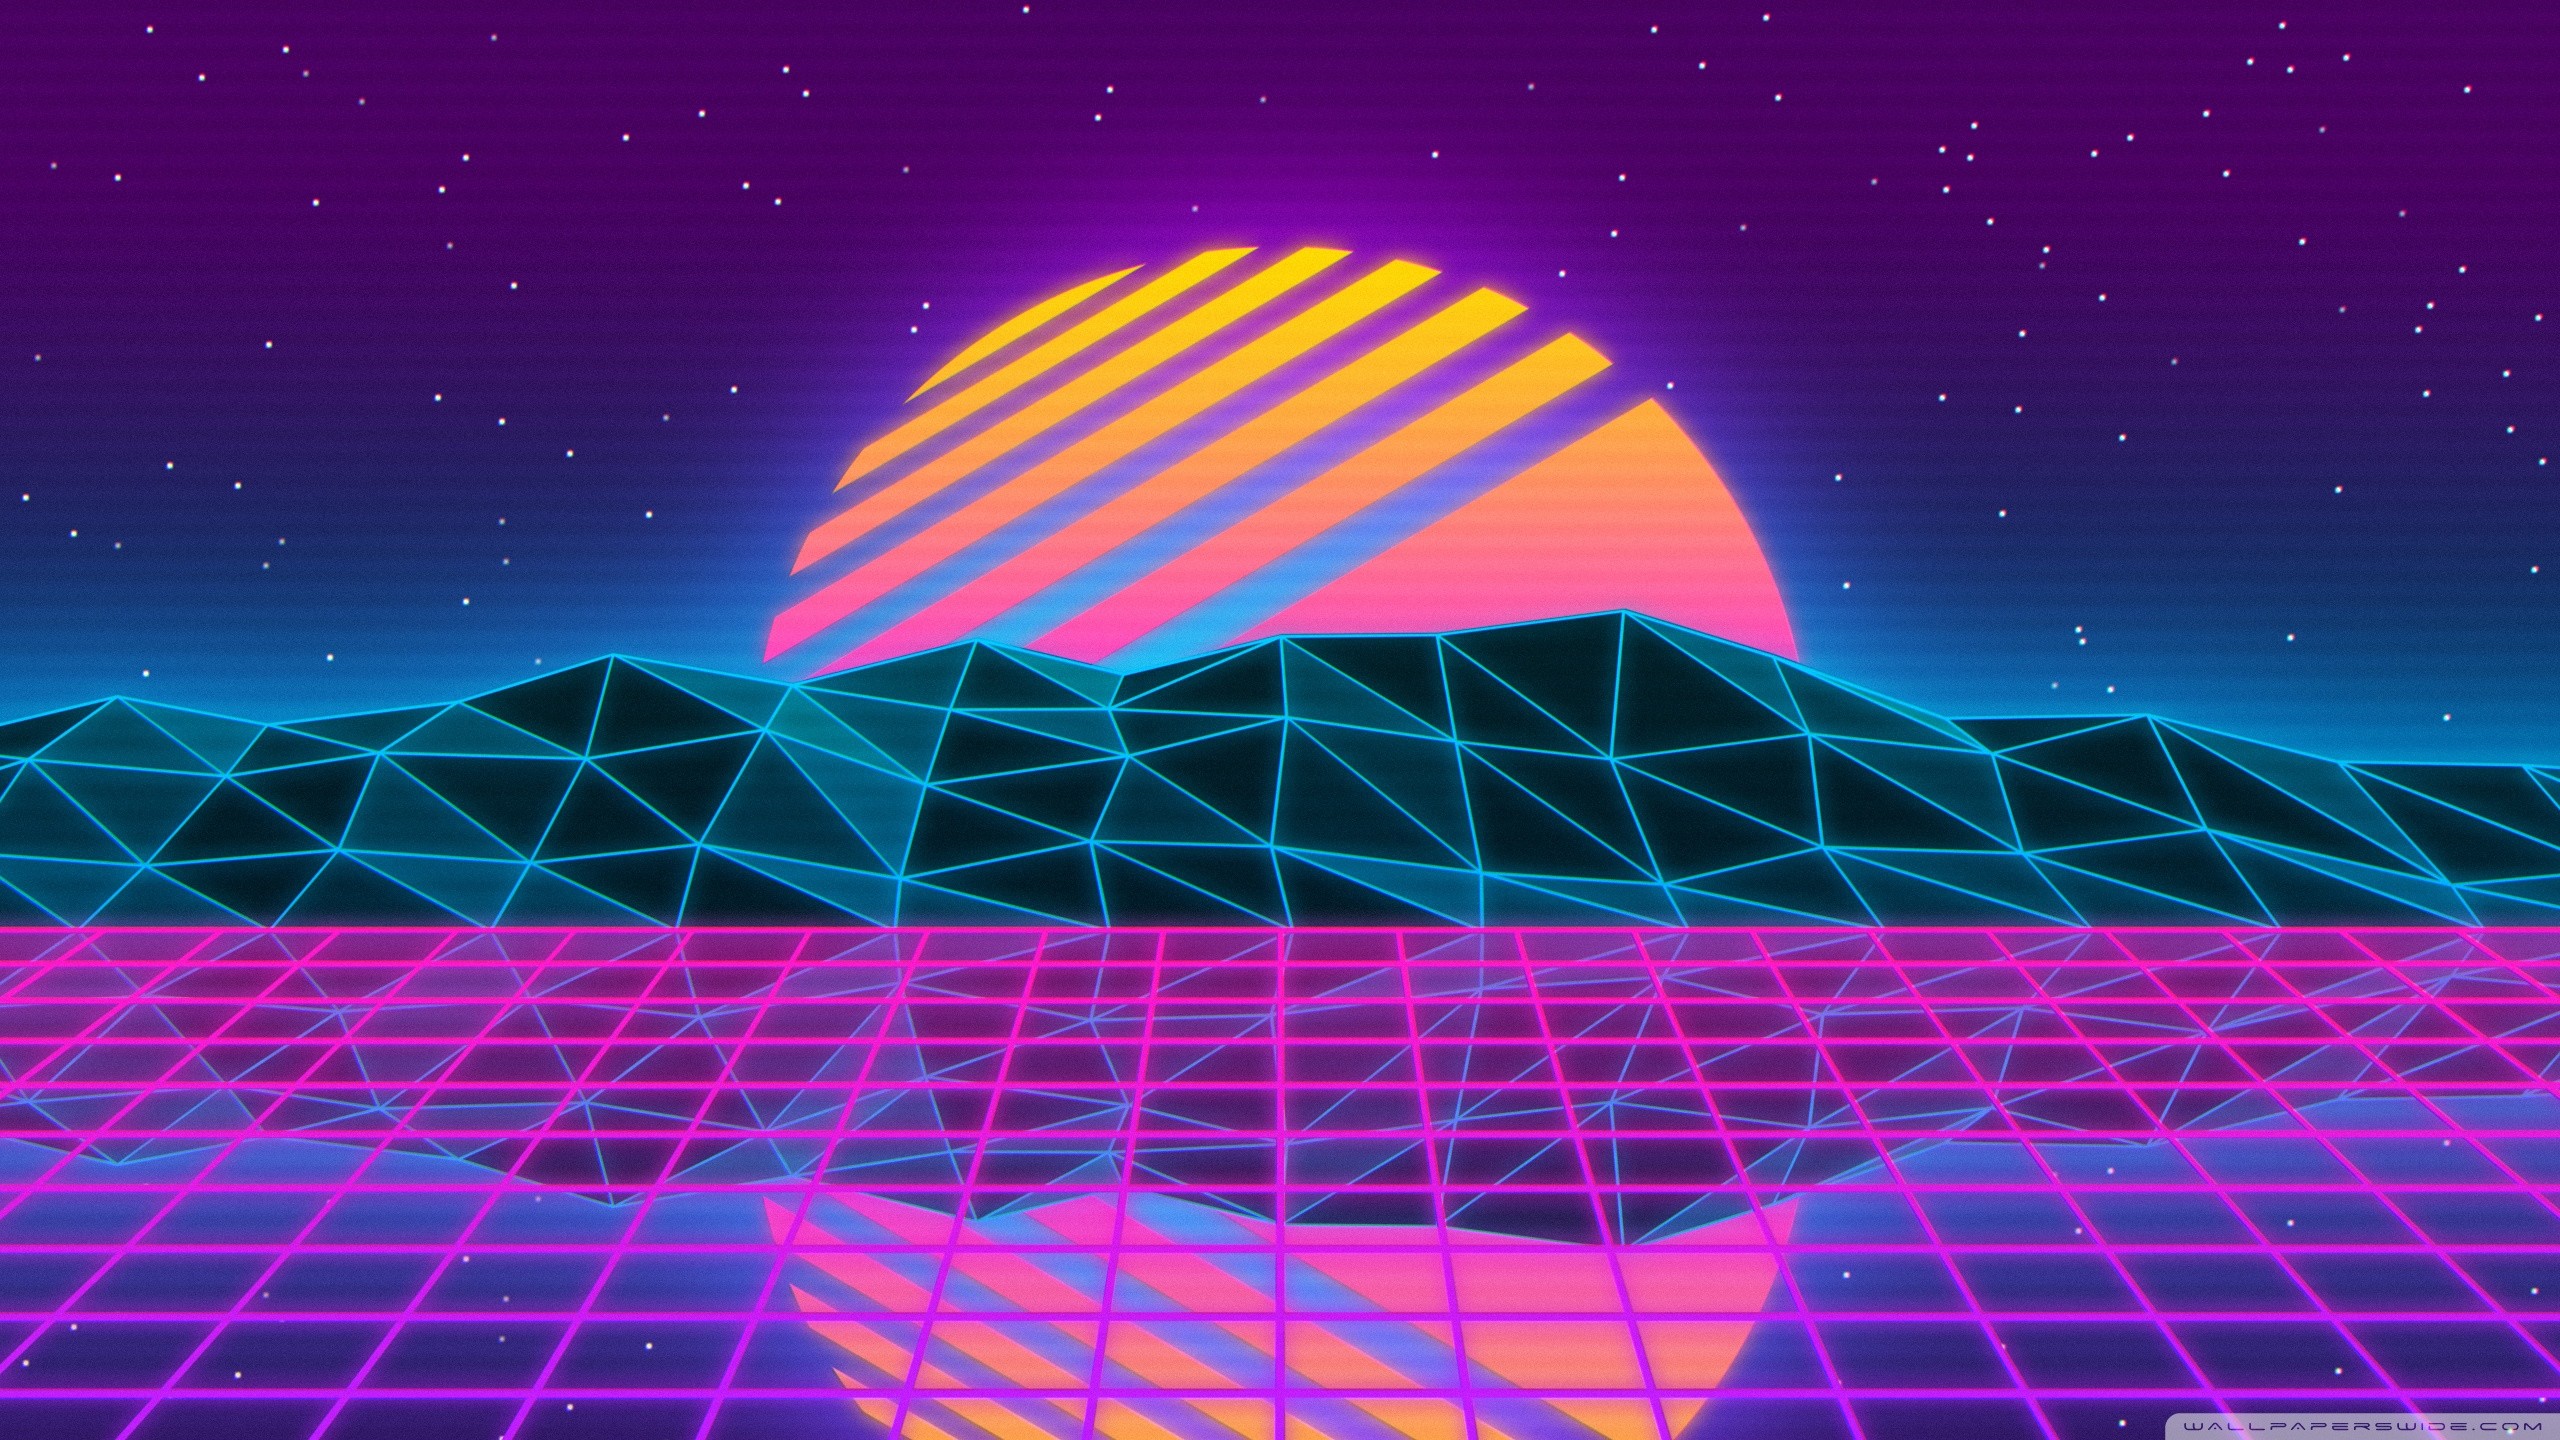 object wallpaper,sky,space,magenta,line,graphic design